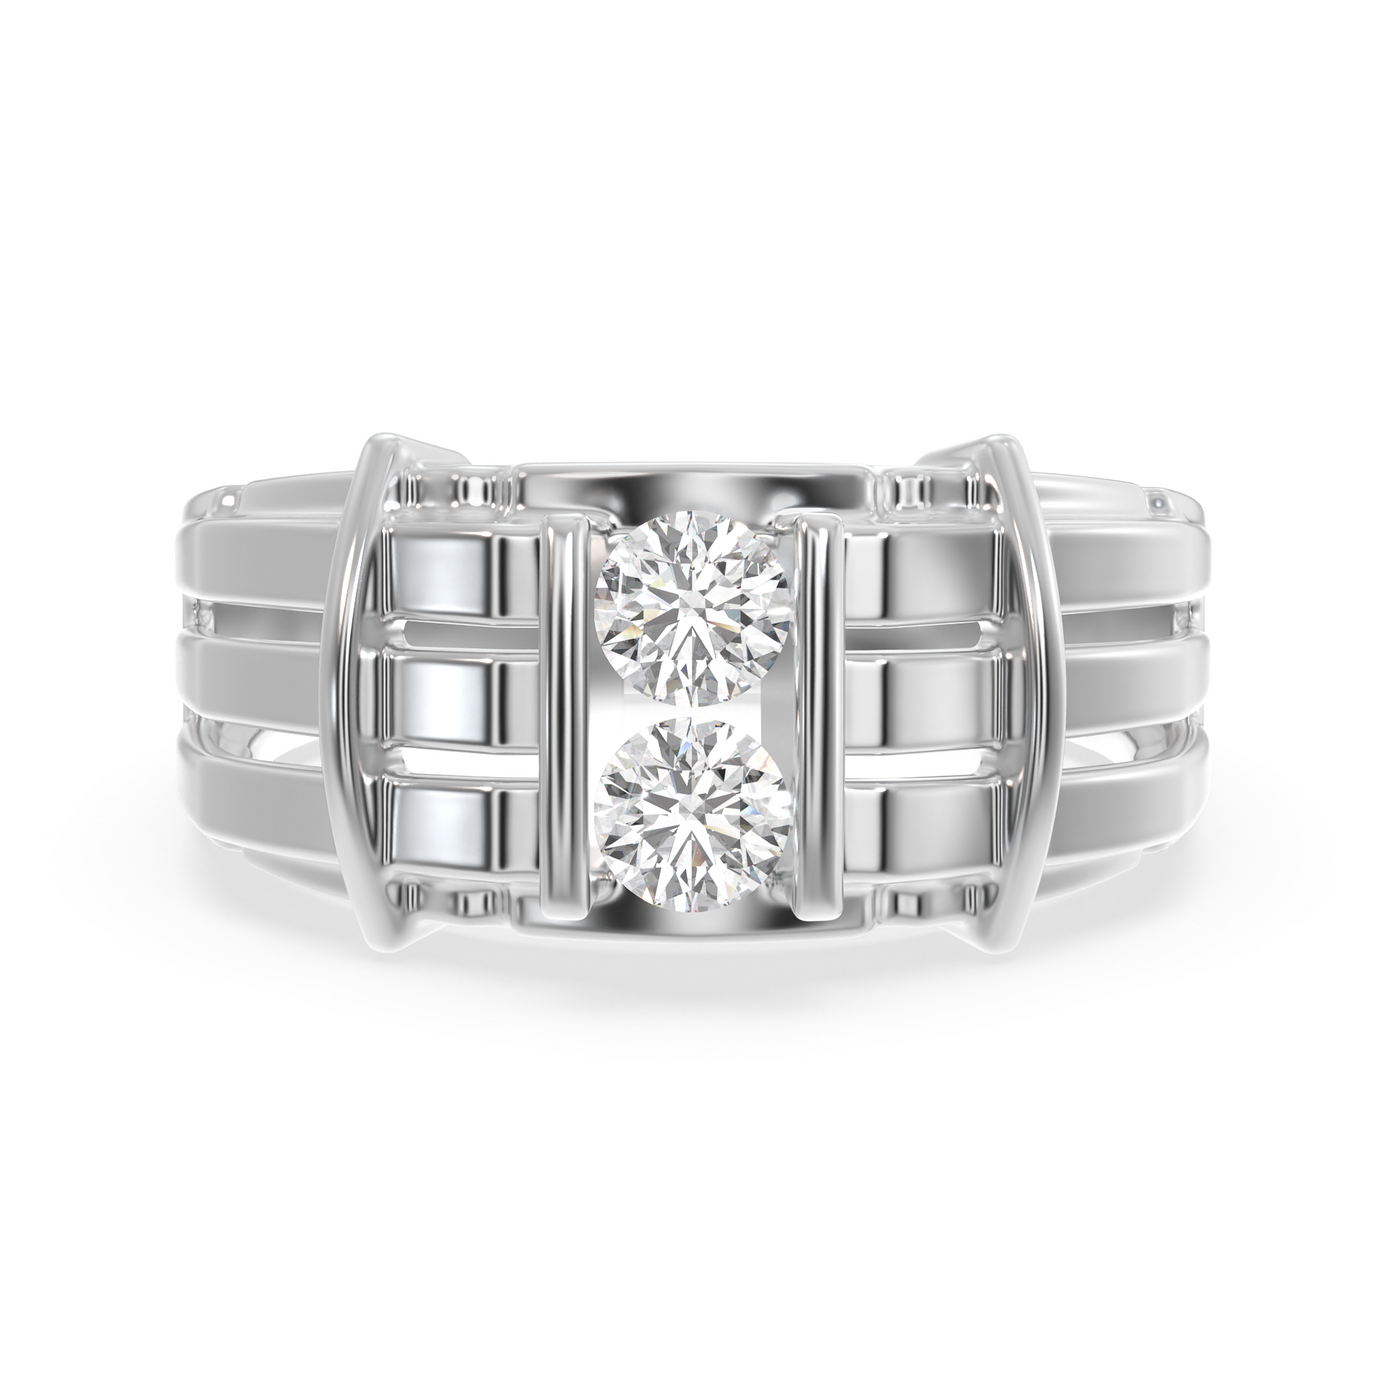 SY Men's Ring in Platinum,  Double Diamond Solitaire